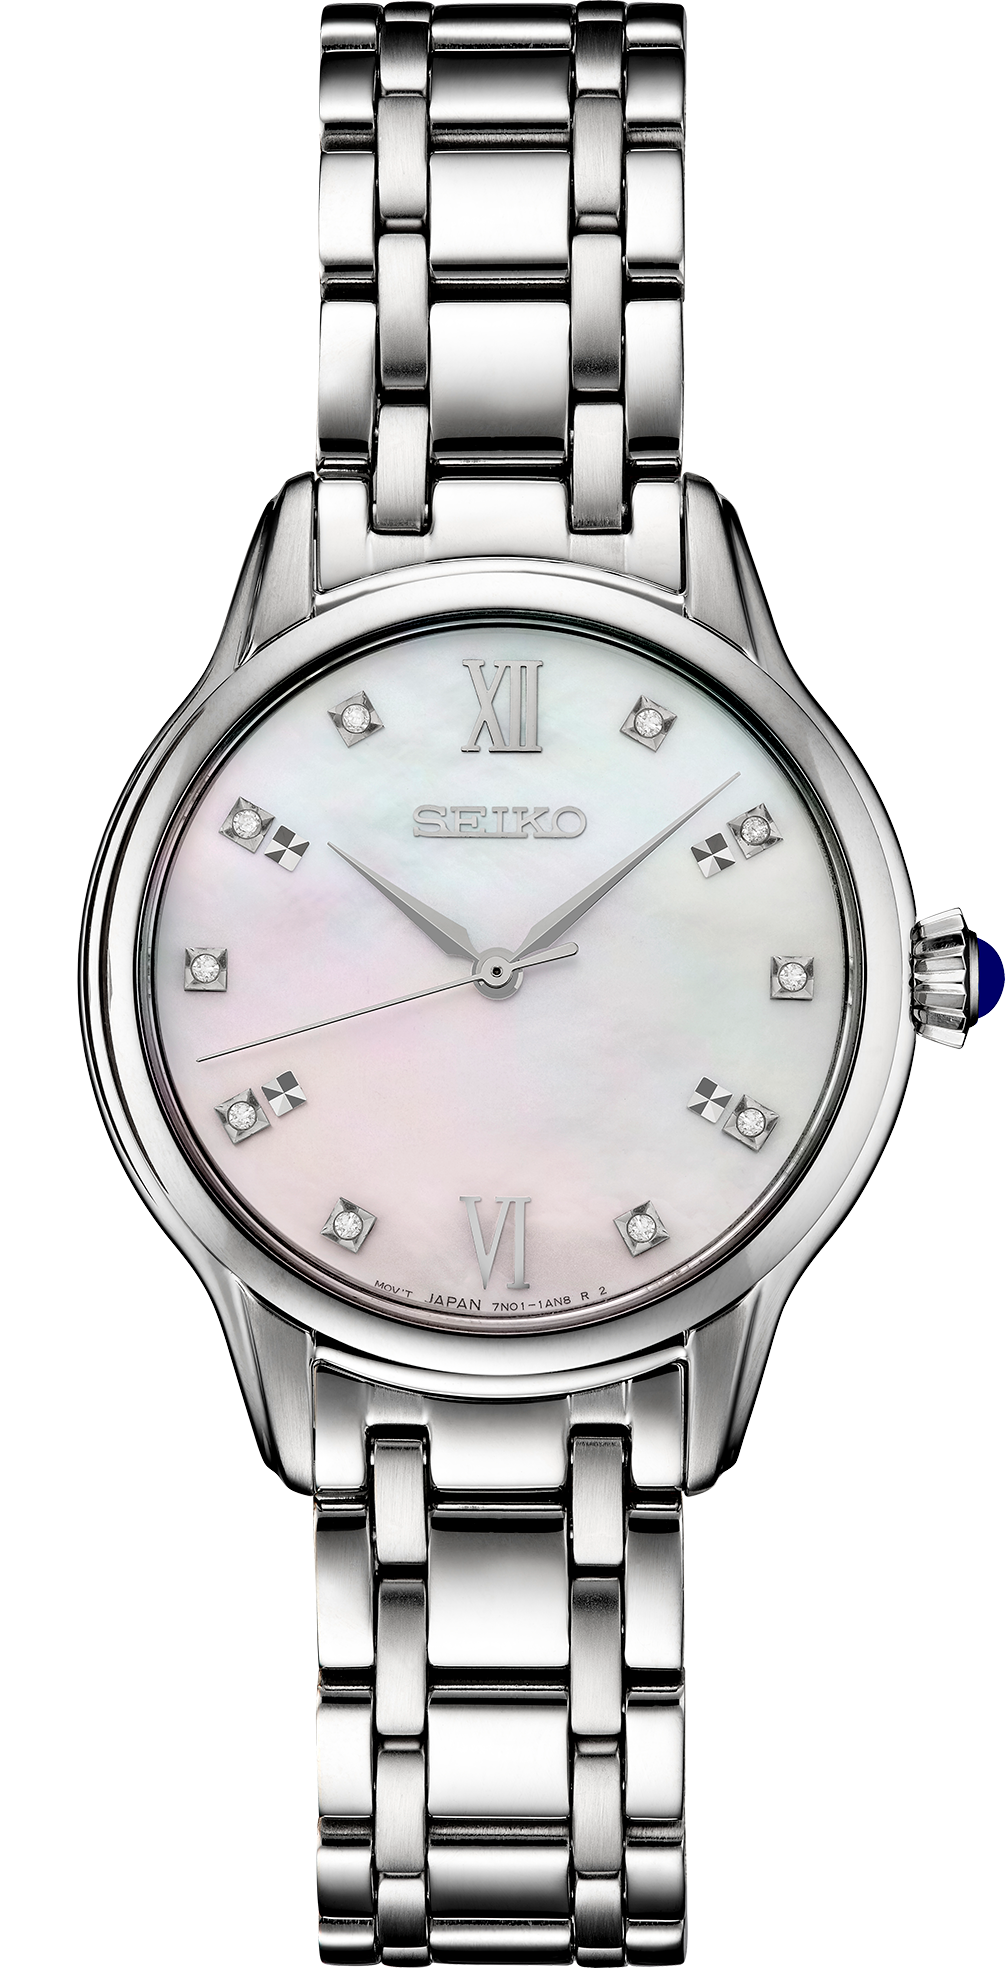 Ladies Seiko Stainless Steel Mother of Pearl Dial Diamond Marker Watch